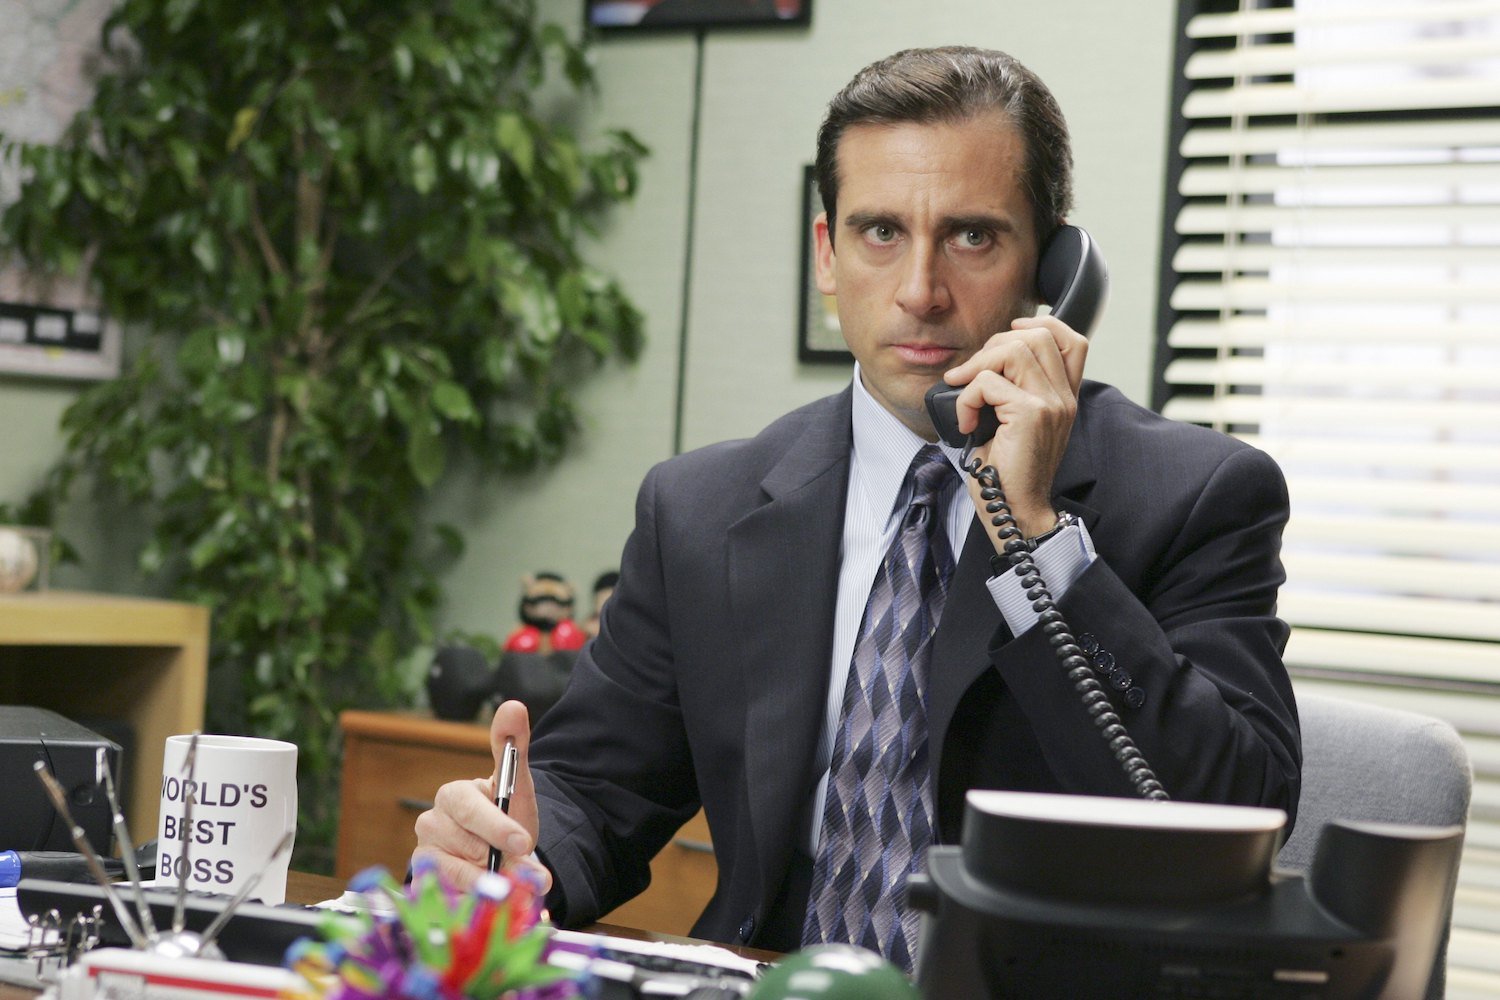 The Office: Steve Carell as Michael Scott on the phone in his office